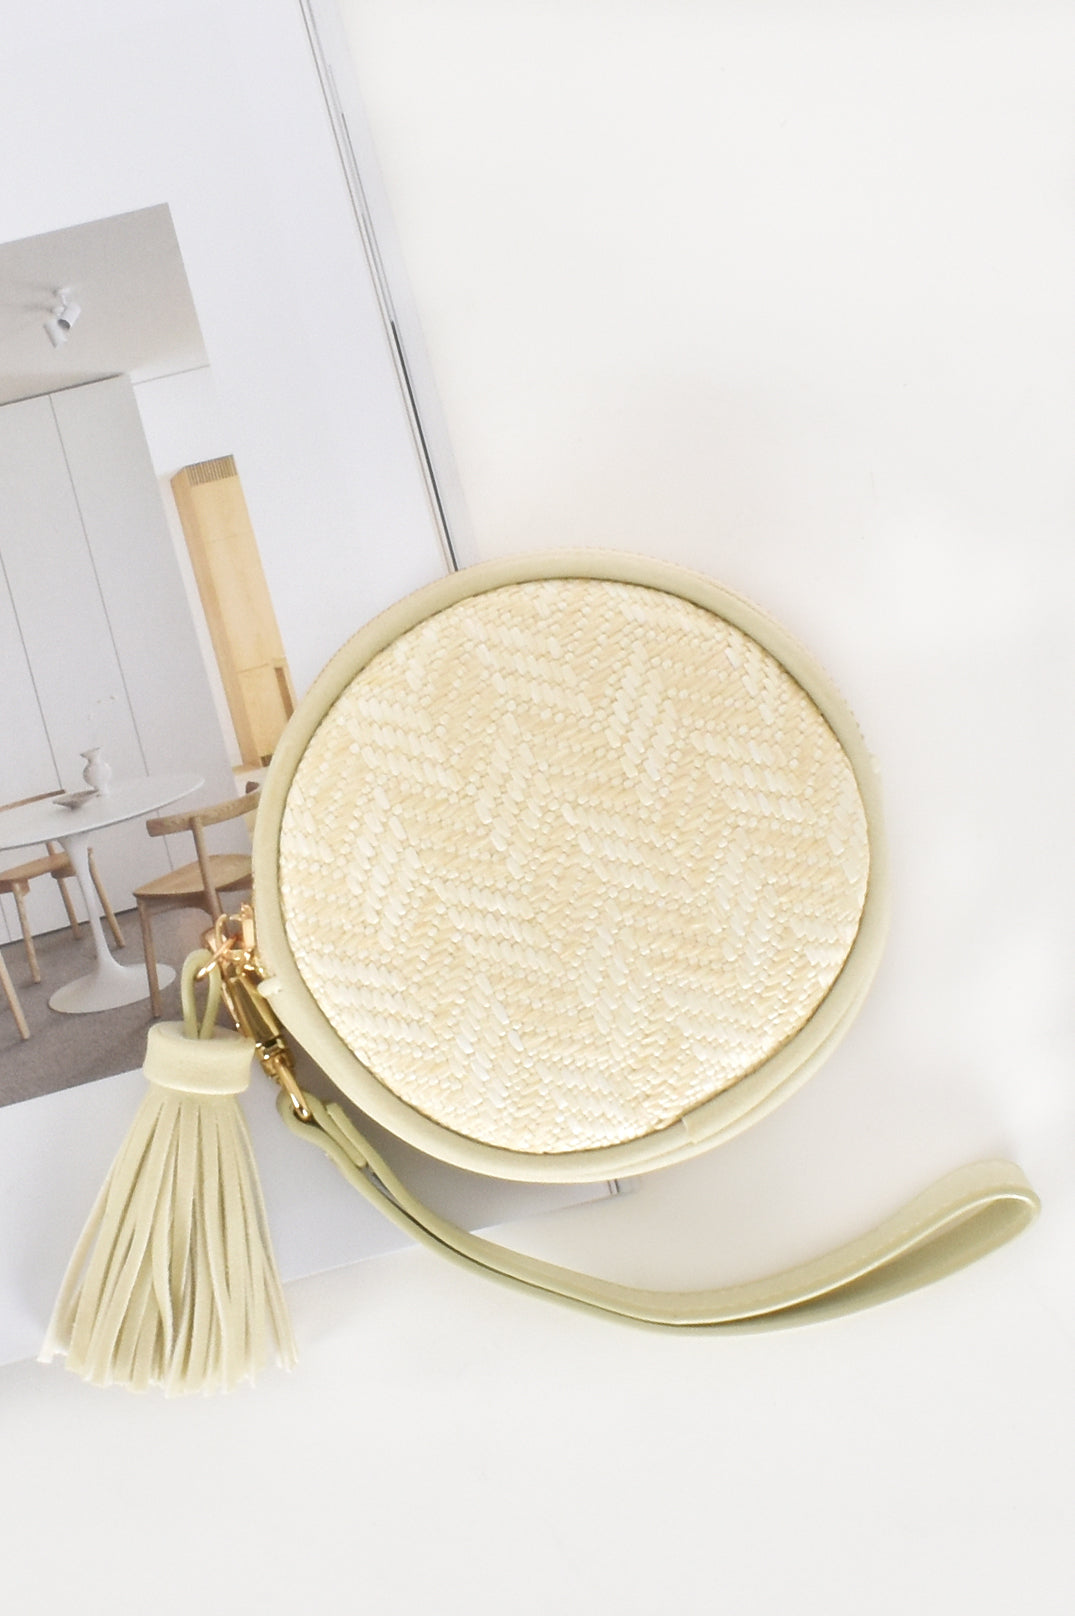 Round Coin Purse in Camel, Stone and Cream!